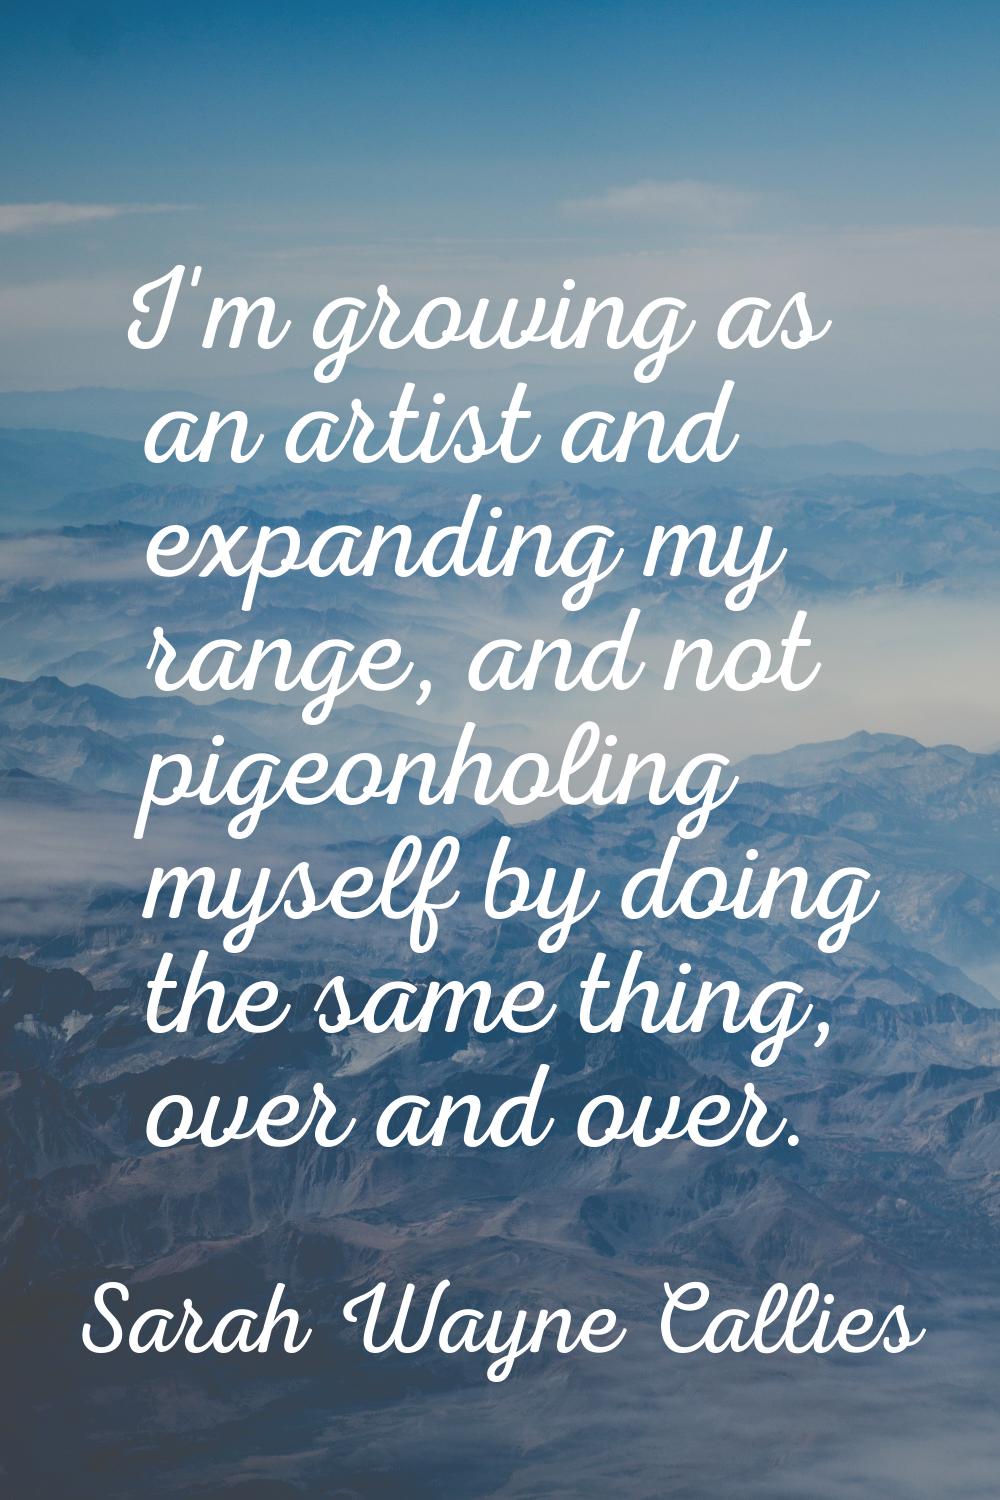 I'm growing as an artist and expanding my range, and not pigeonholing myself by doing the same thin